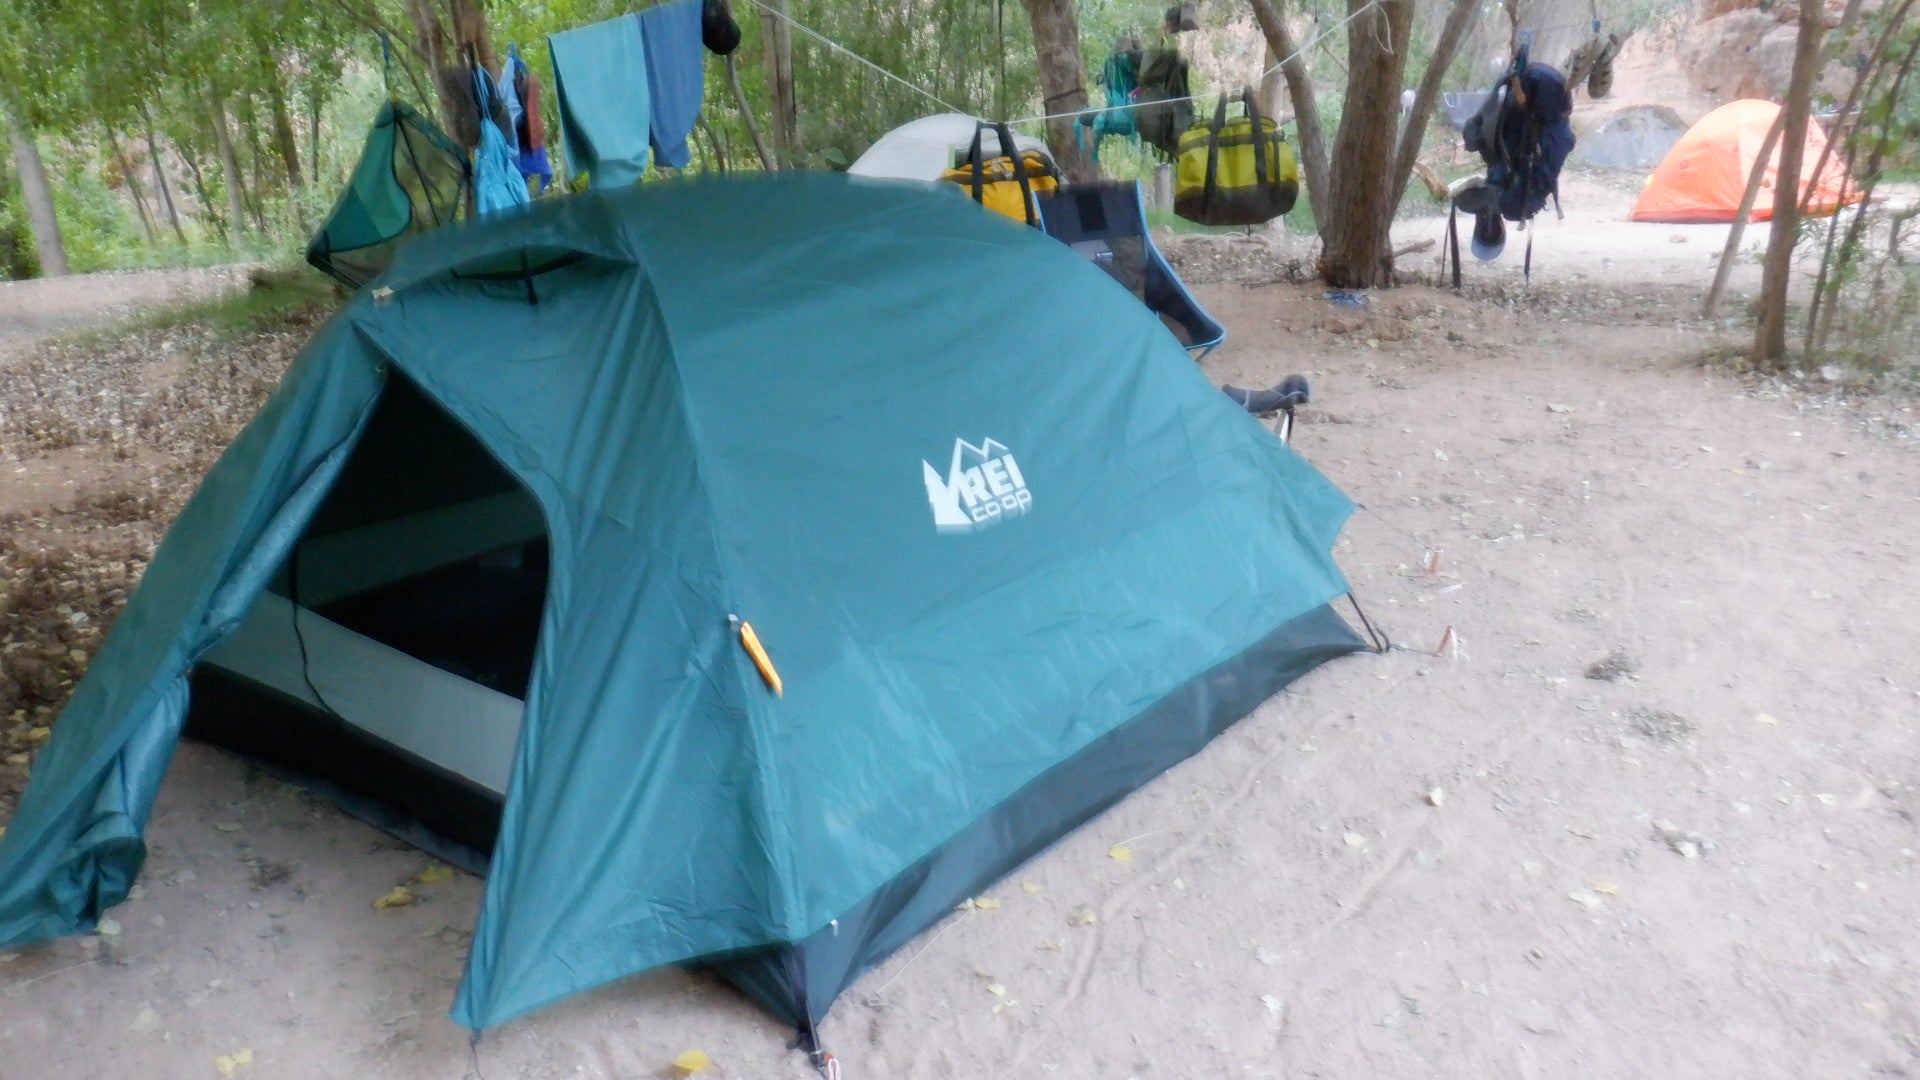 Camper submitted image from Havasupai Reservation Campground - 5